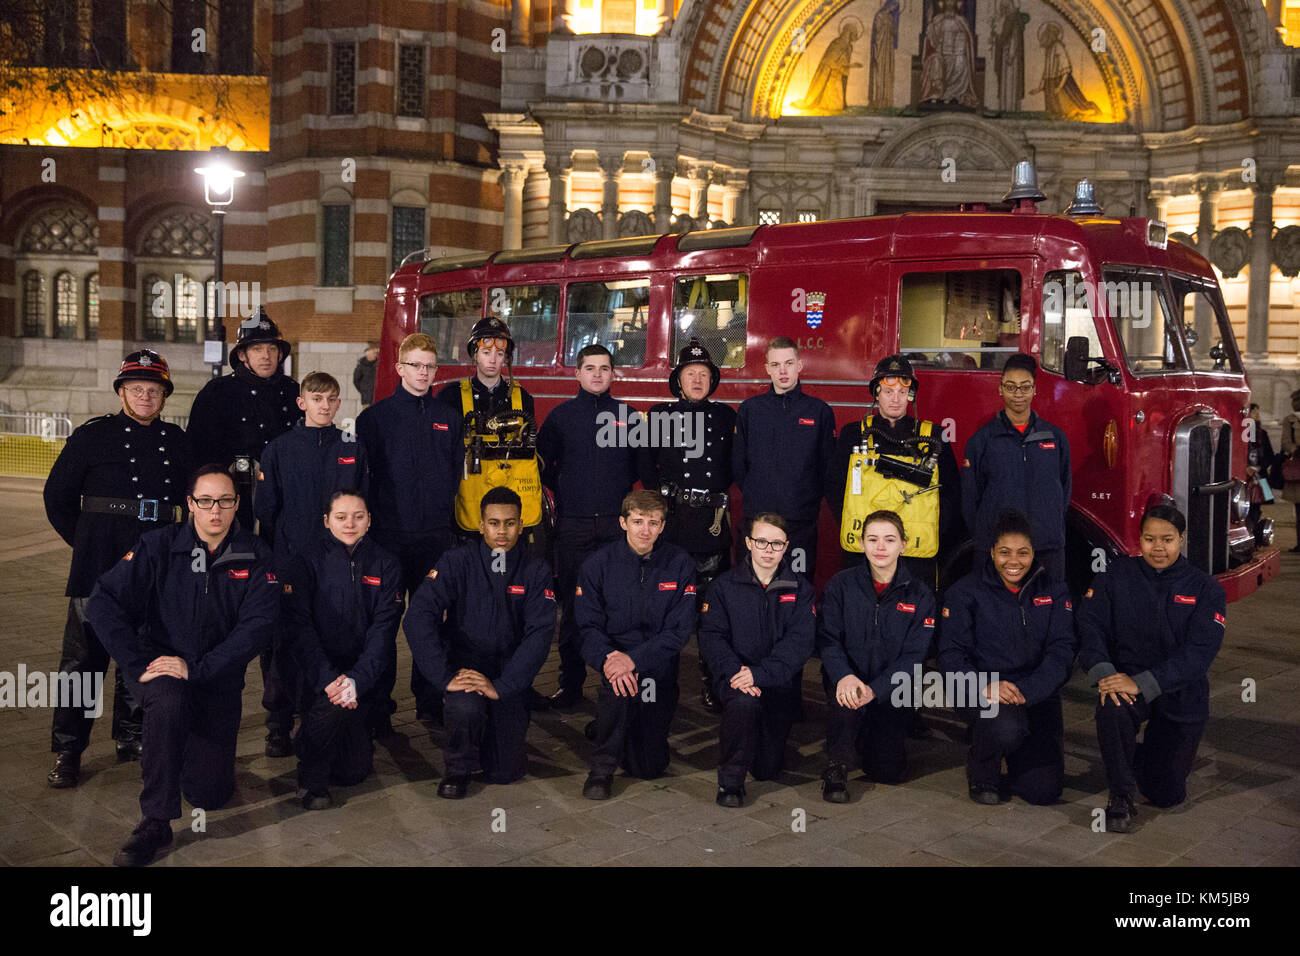 London, UK. 4th Dec, 2017. London Fire Brigade cadets and staff wearing period uniform stand in front of the 1954 Merryweather Emergency Tender vintage fire engine outside Westminster Cathedral prior to the arrival of Prince Harry to attend the London Fire Brigade carol service. The annual service features festive readings and traditional Christmas carols for London Fire Brigade's uniformed and non-uniformed members of staff and their families as well as retired ex-colleagues. Credit: Mark Kerrison/Alamy Live News Stock Photo